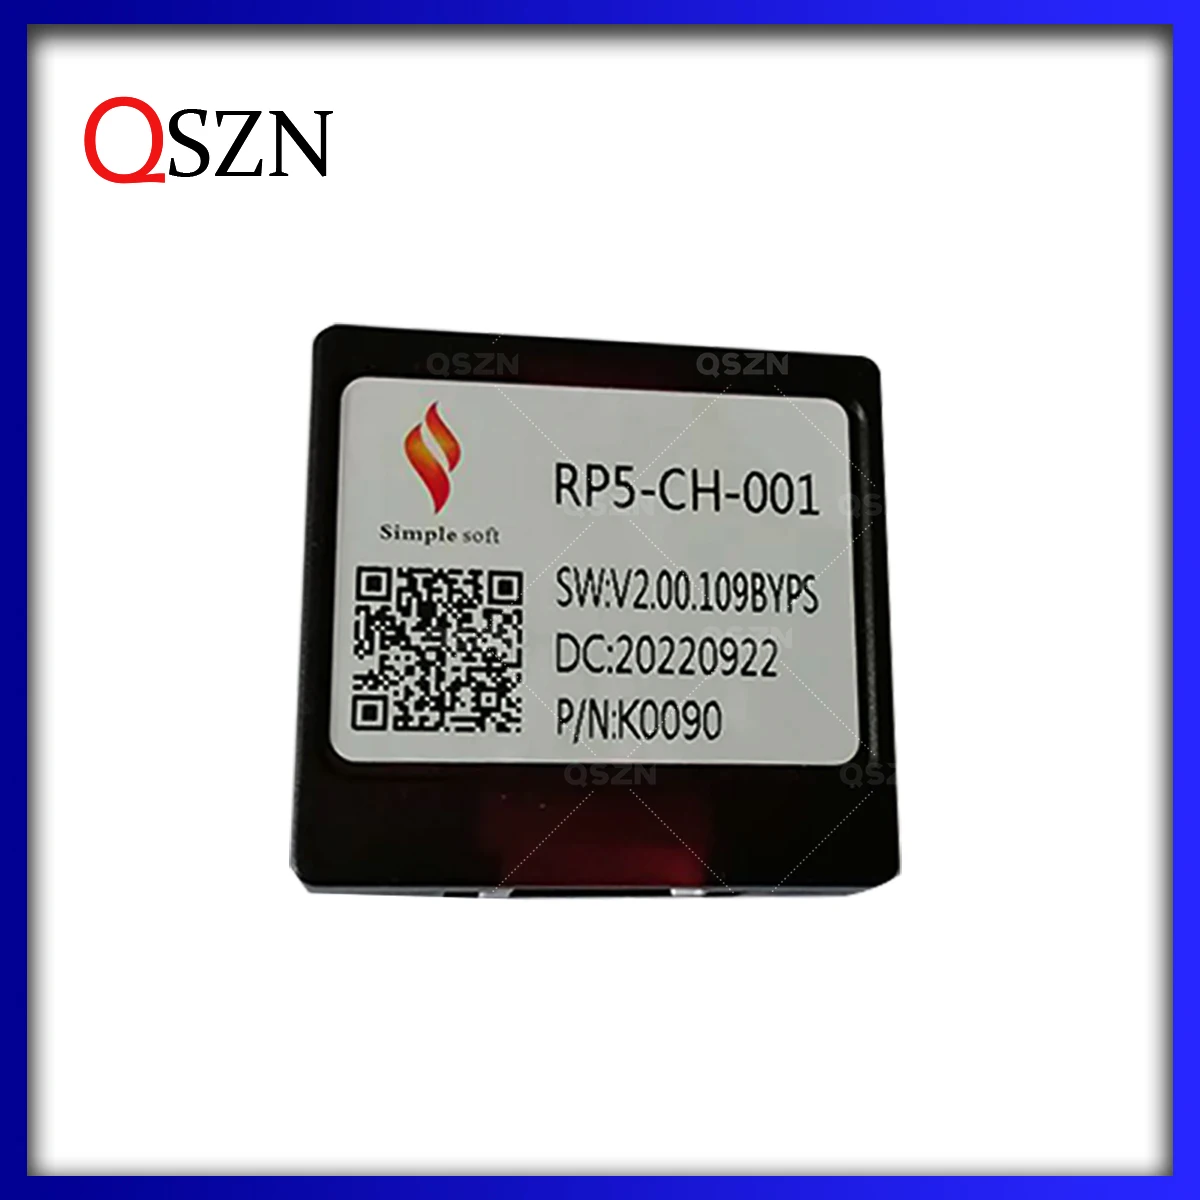 

QSZN Car Radio Canbus Box CH-SS-06/RP5-CH-001 For Jeep Radio Android Wiring Harness Power Cable